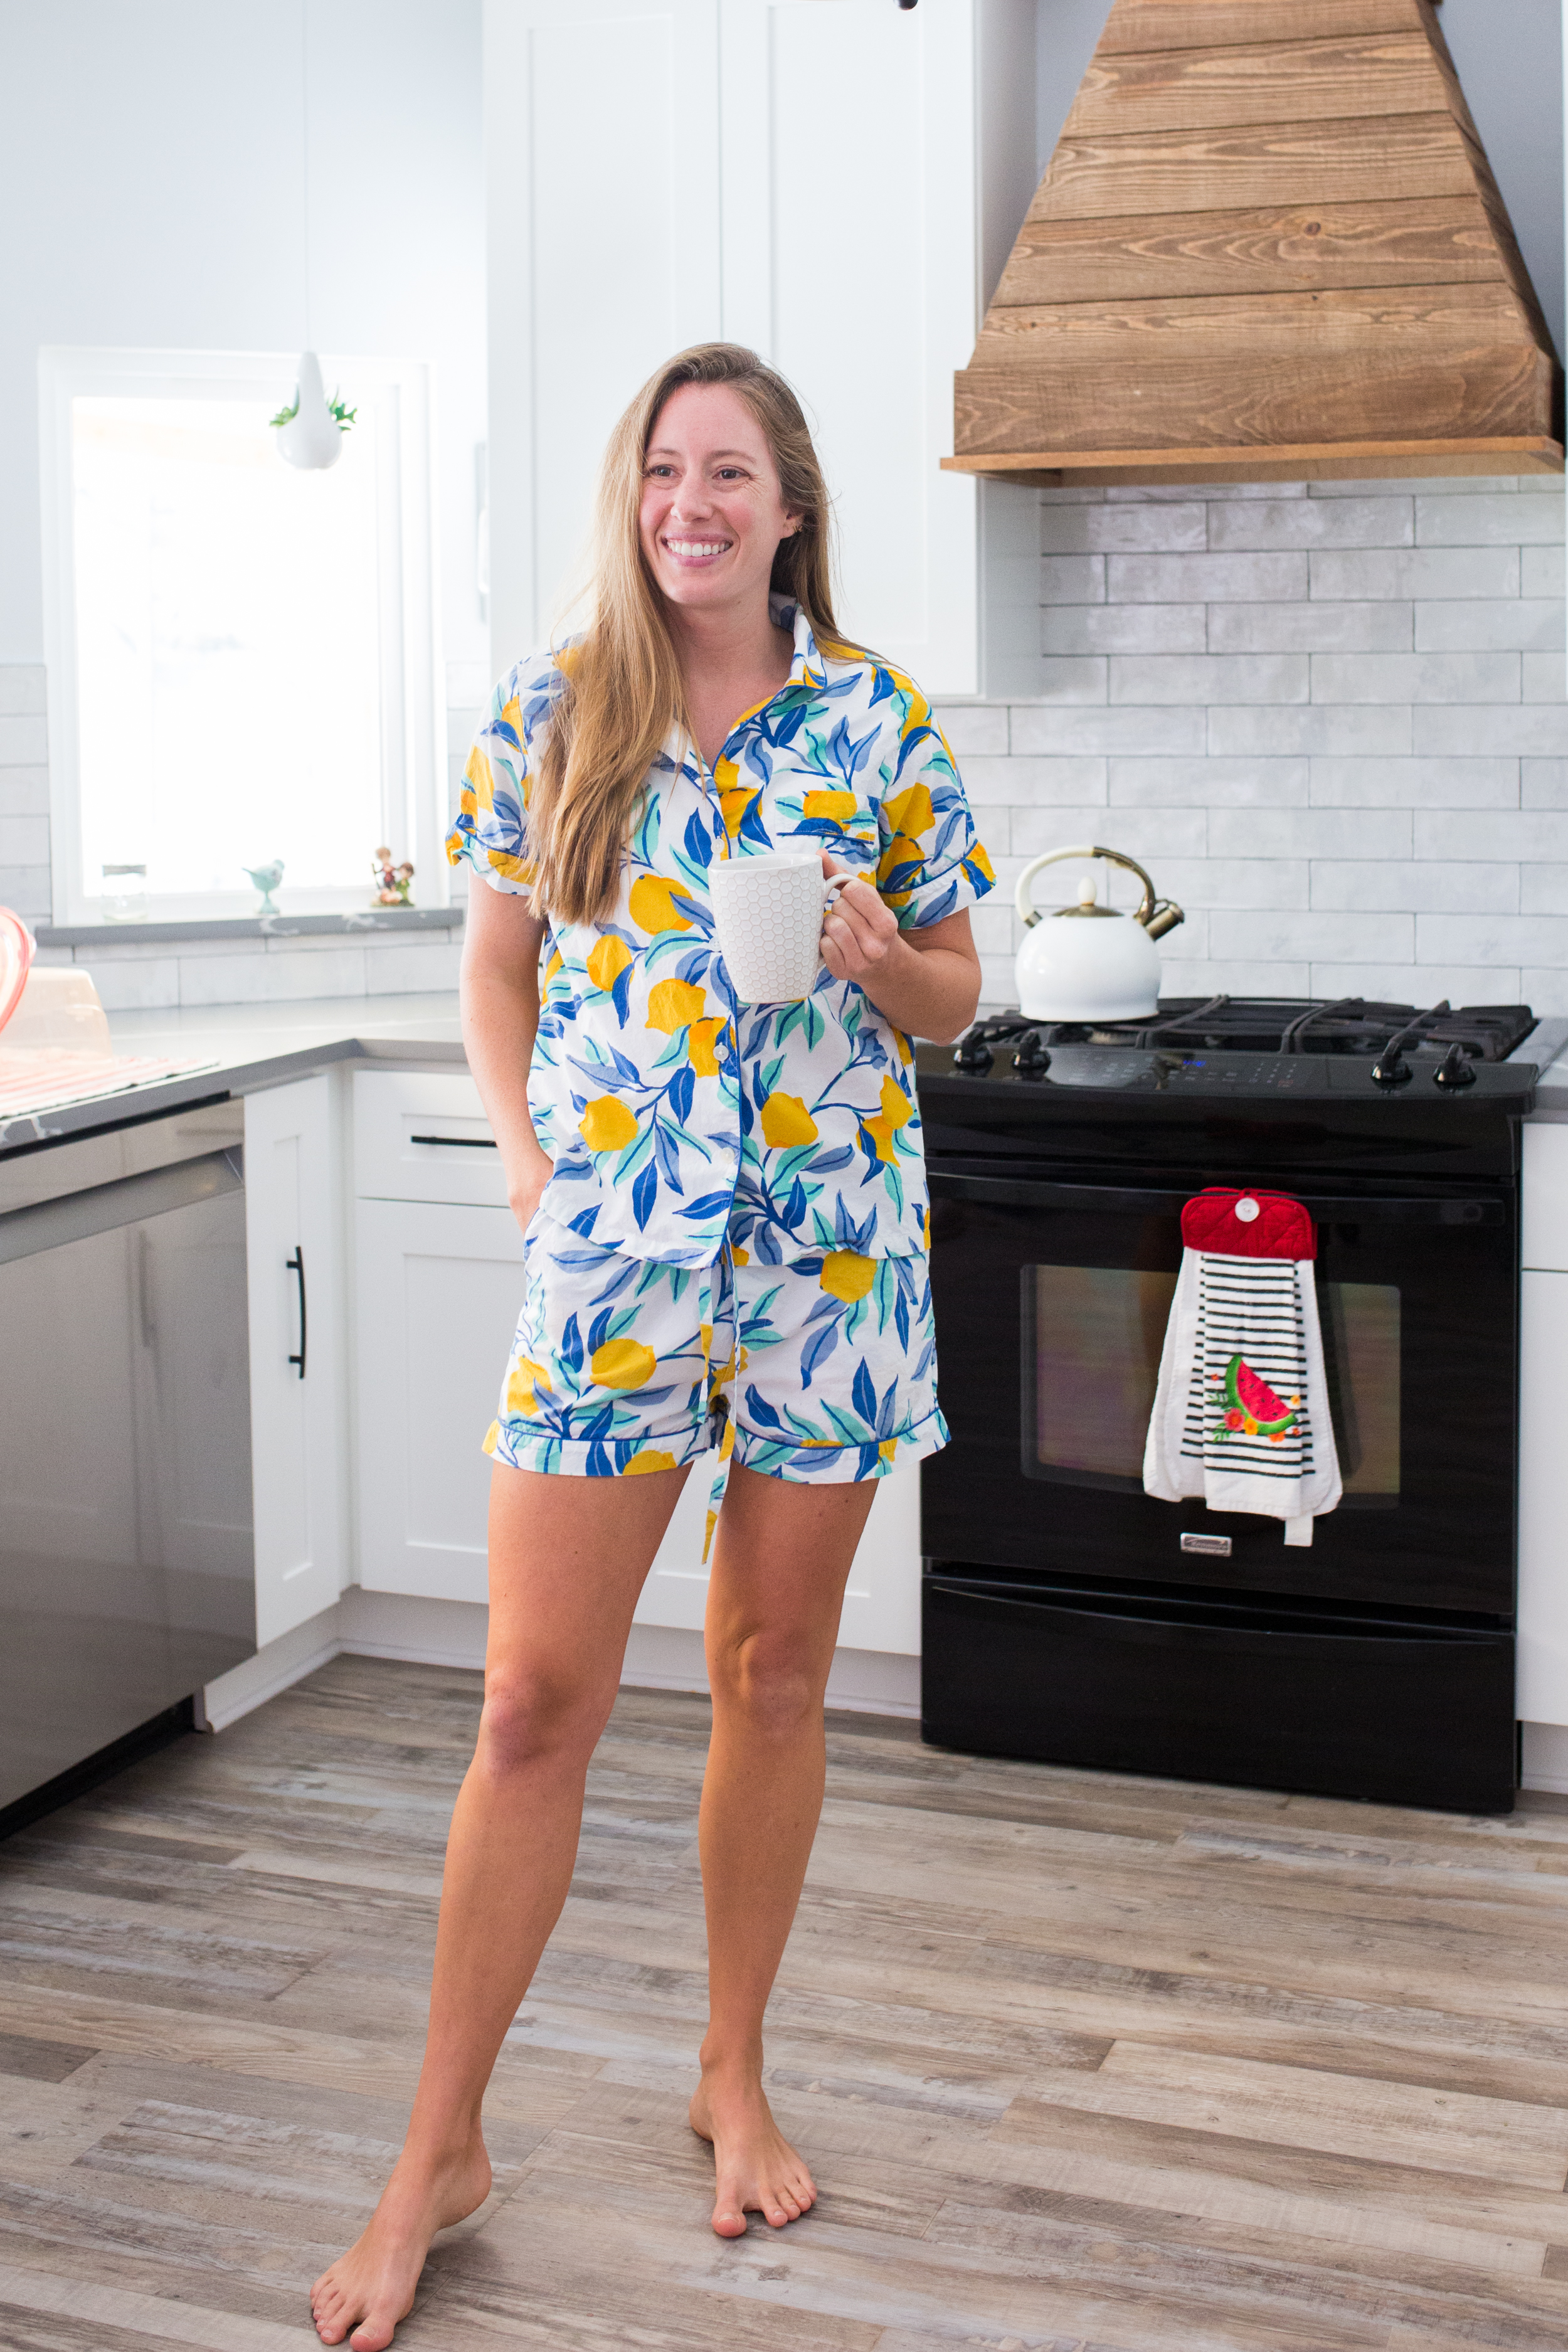 These Printfresh short and long sleep sets are perfect for summer and beyond. These matching pajama sets are made from 100% organic cotton sustainably in India. Click to see my review of the matching Printfresh Pajamas including sizing!